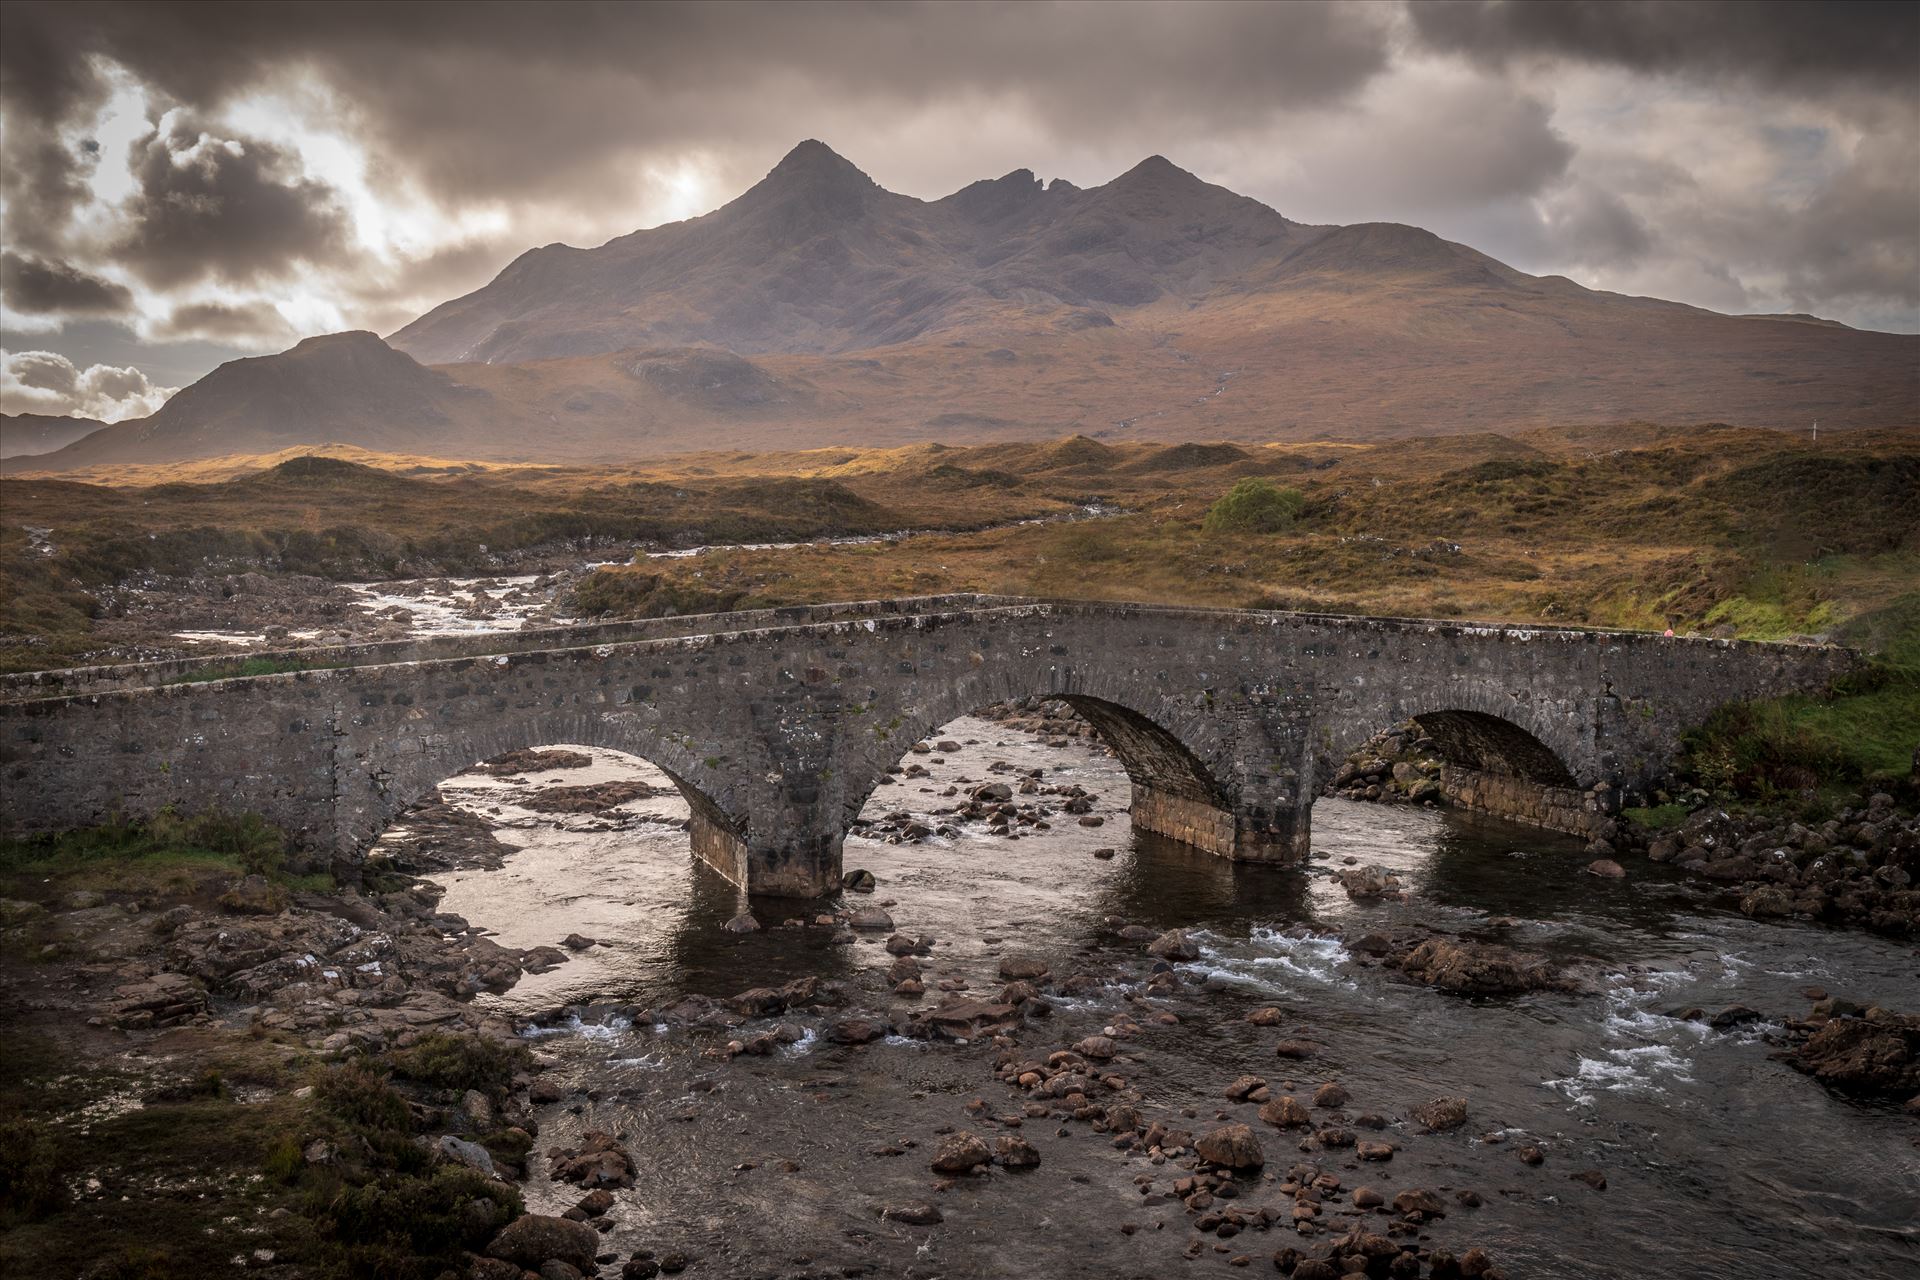 Sligachan Bridge, Isle of Skye (2) - Sligachan is situated at the junction of the roads from Portree, Dunvegan & Broadford on the Isle of Skye. The Cullin mountains can be seen in the background. by philreay